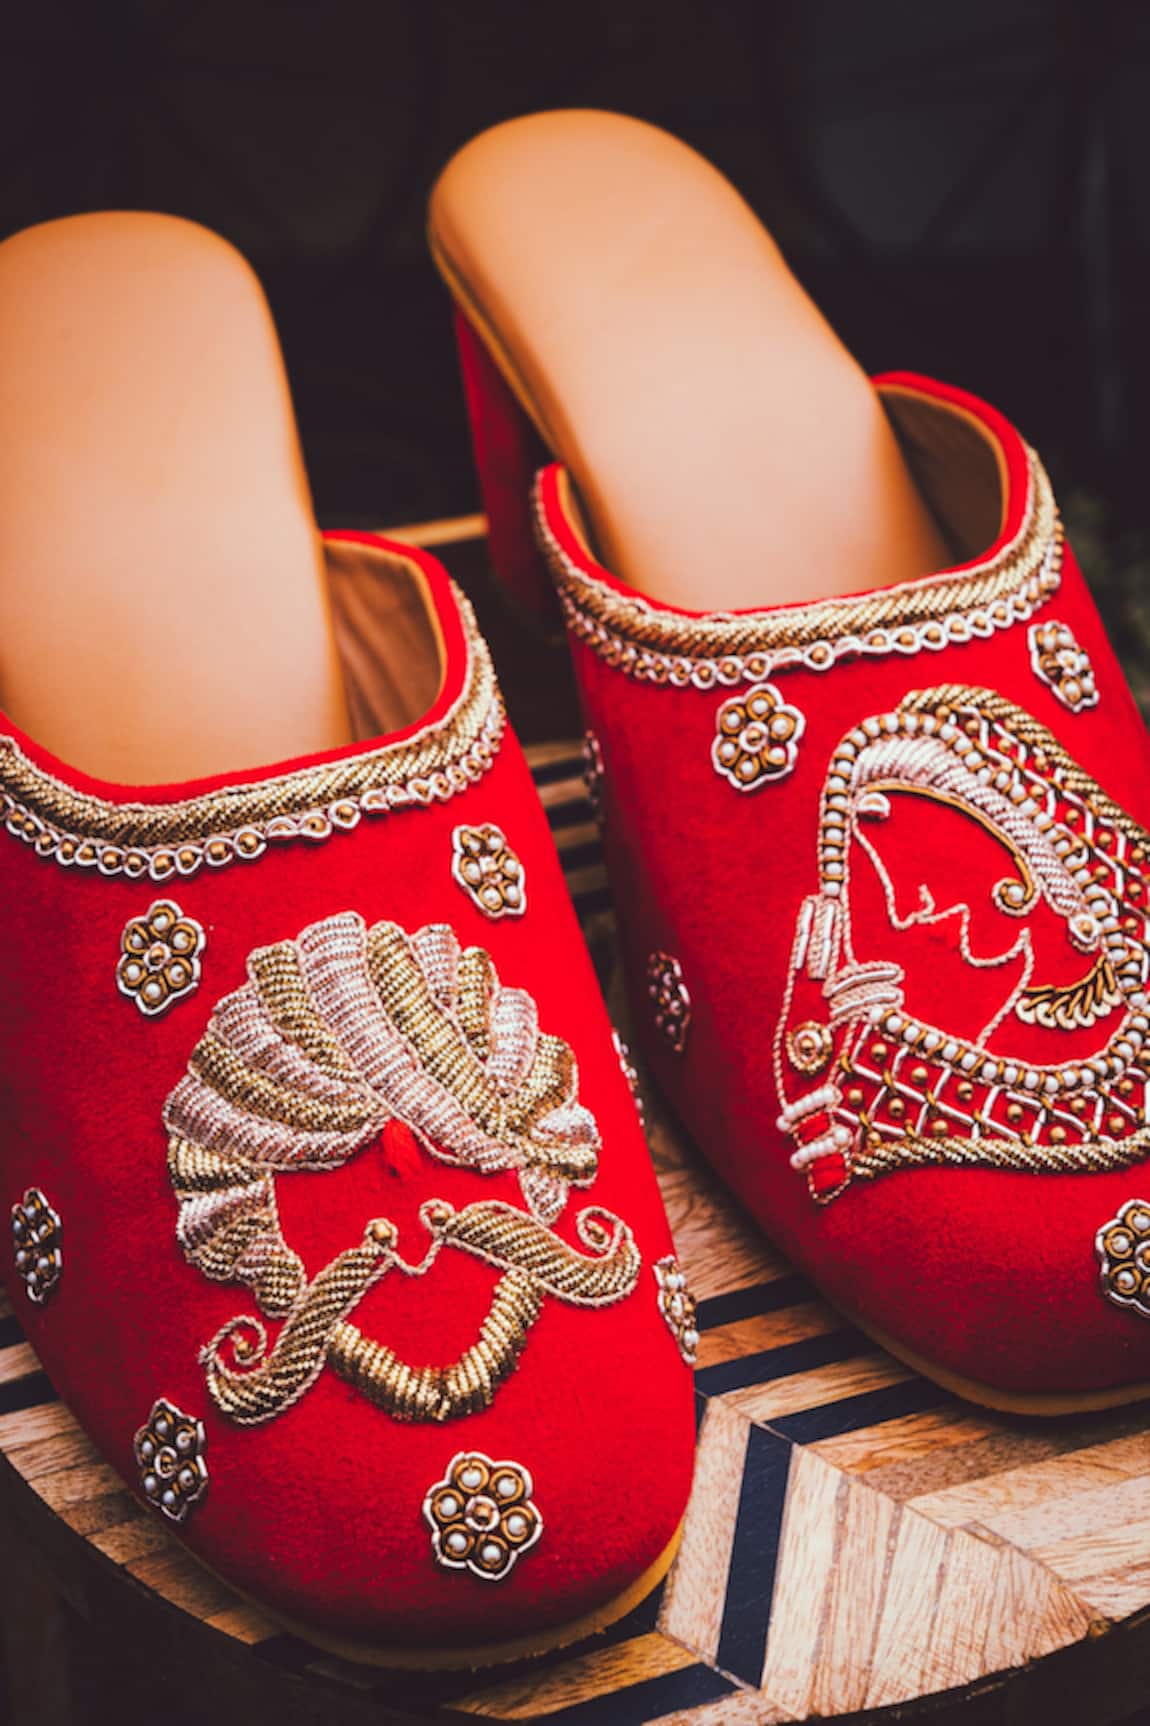 NR BY NIDHI RATHI Embroidered Mules Heels